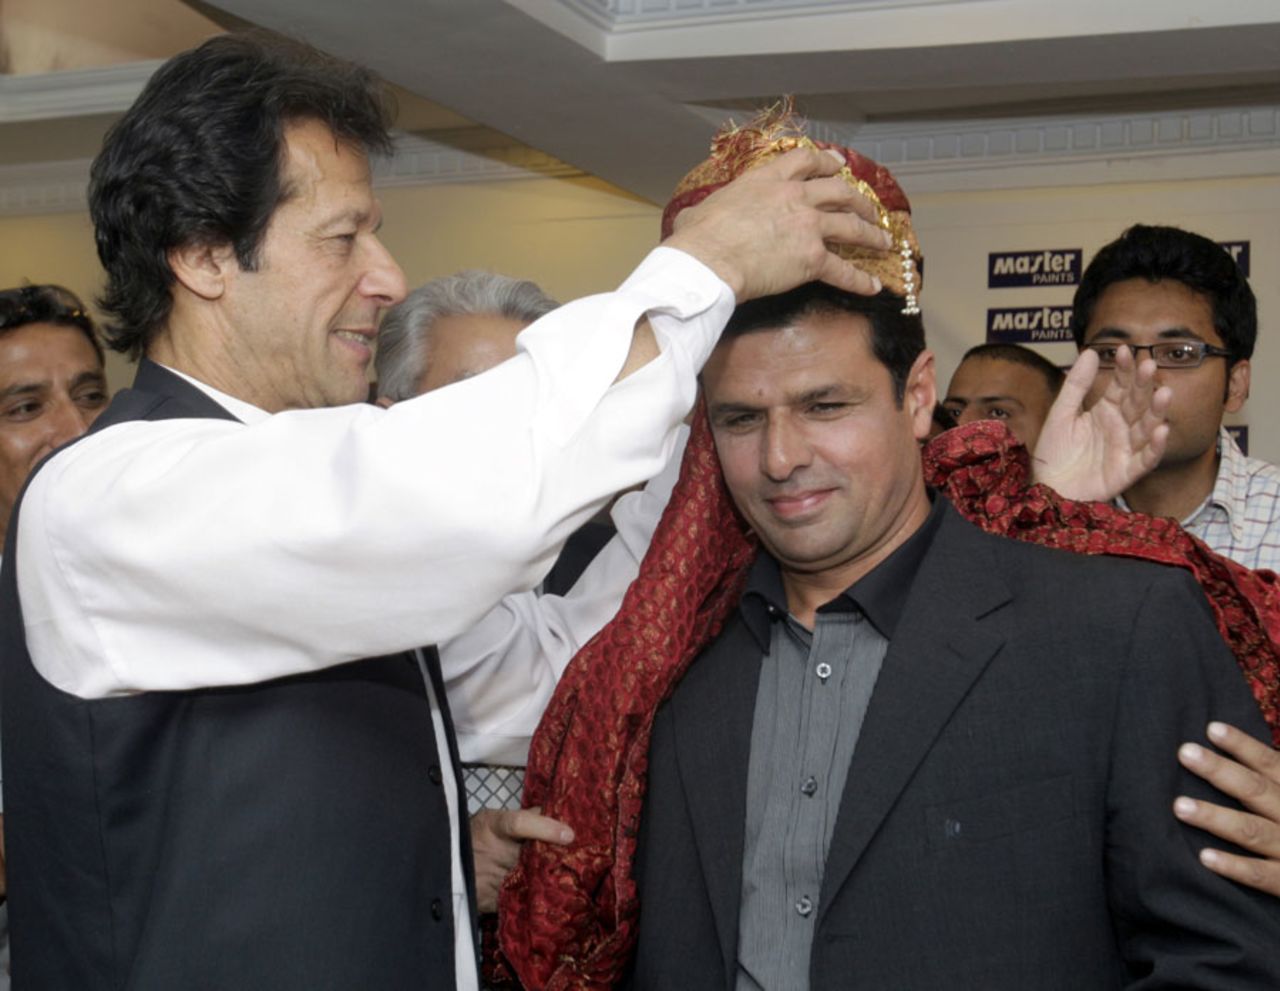 Imran Khan felicitates umpire Aleem Dar, who had a 100 percent track record during the World Cup, Lahore, April 7, 2011